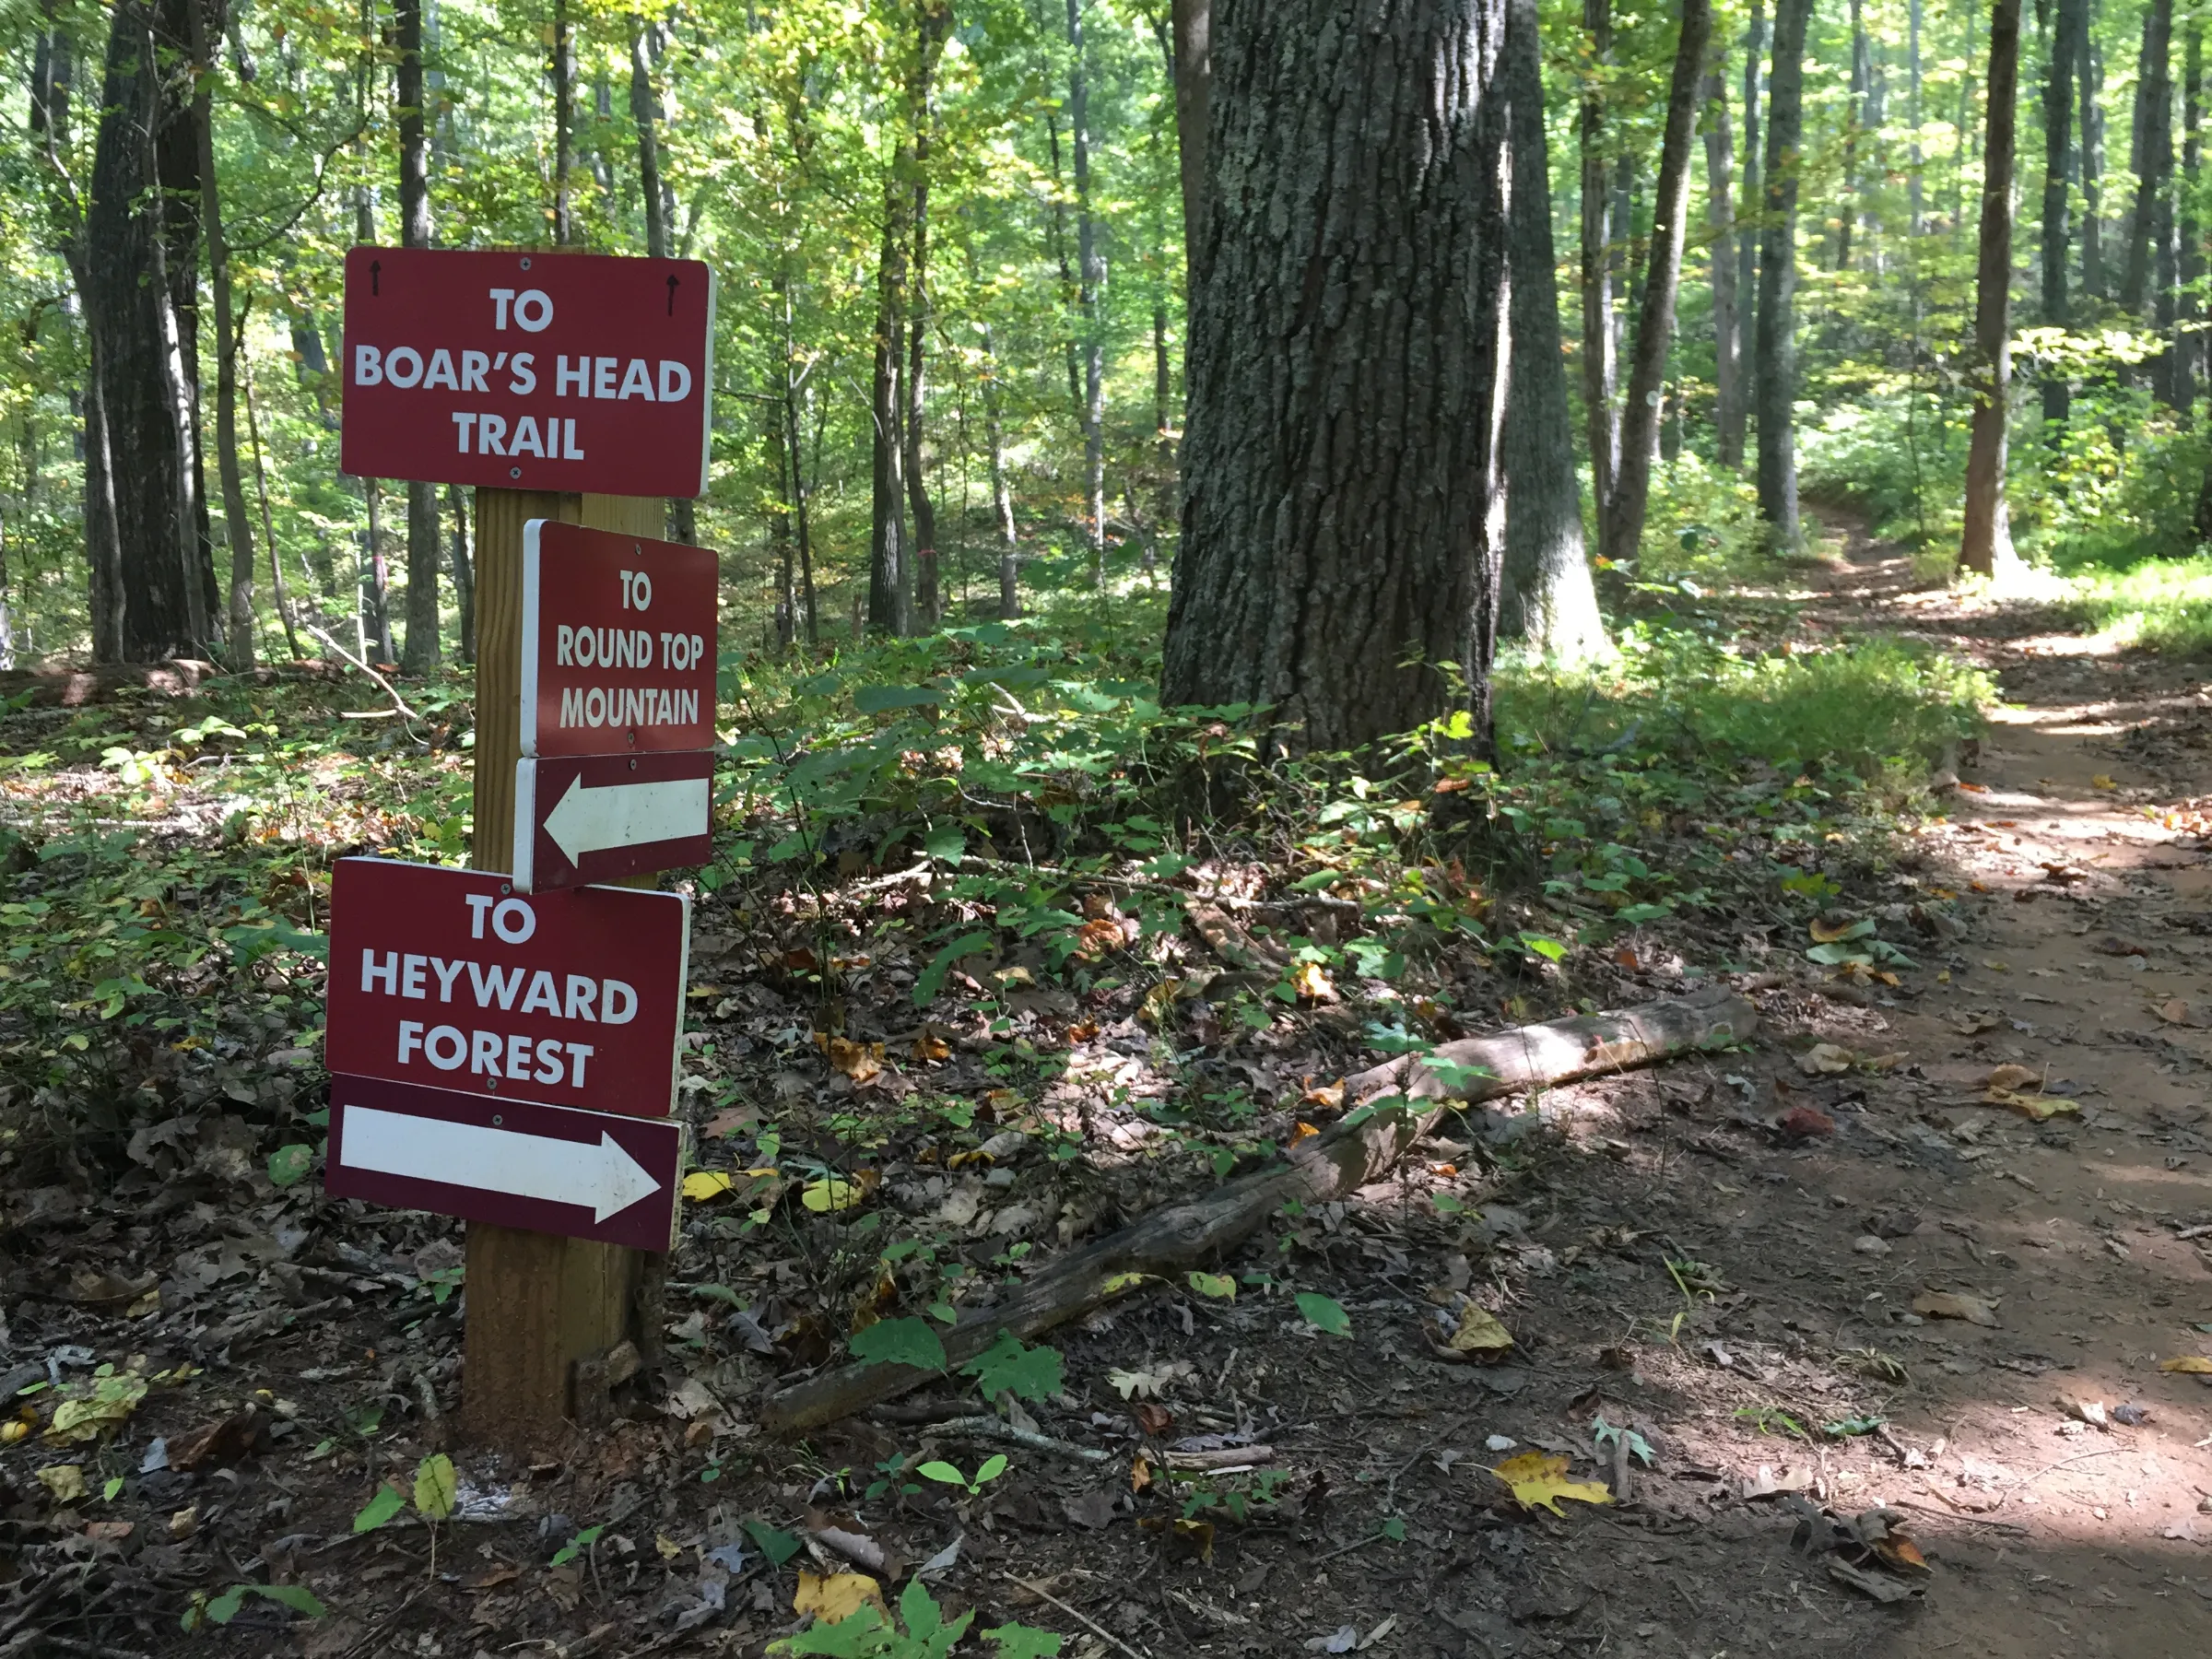 Trail signs in the new Heyward Community Forest in Charlottesville, Virginia.